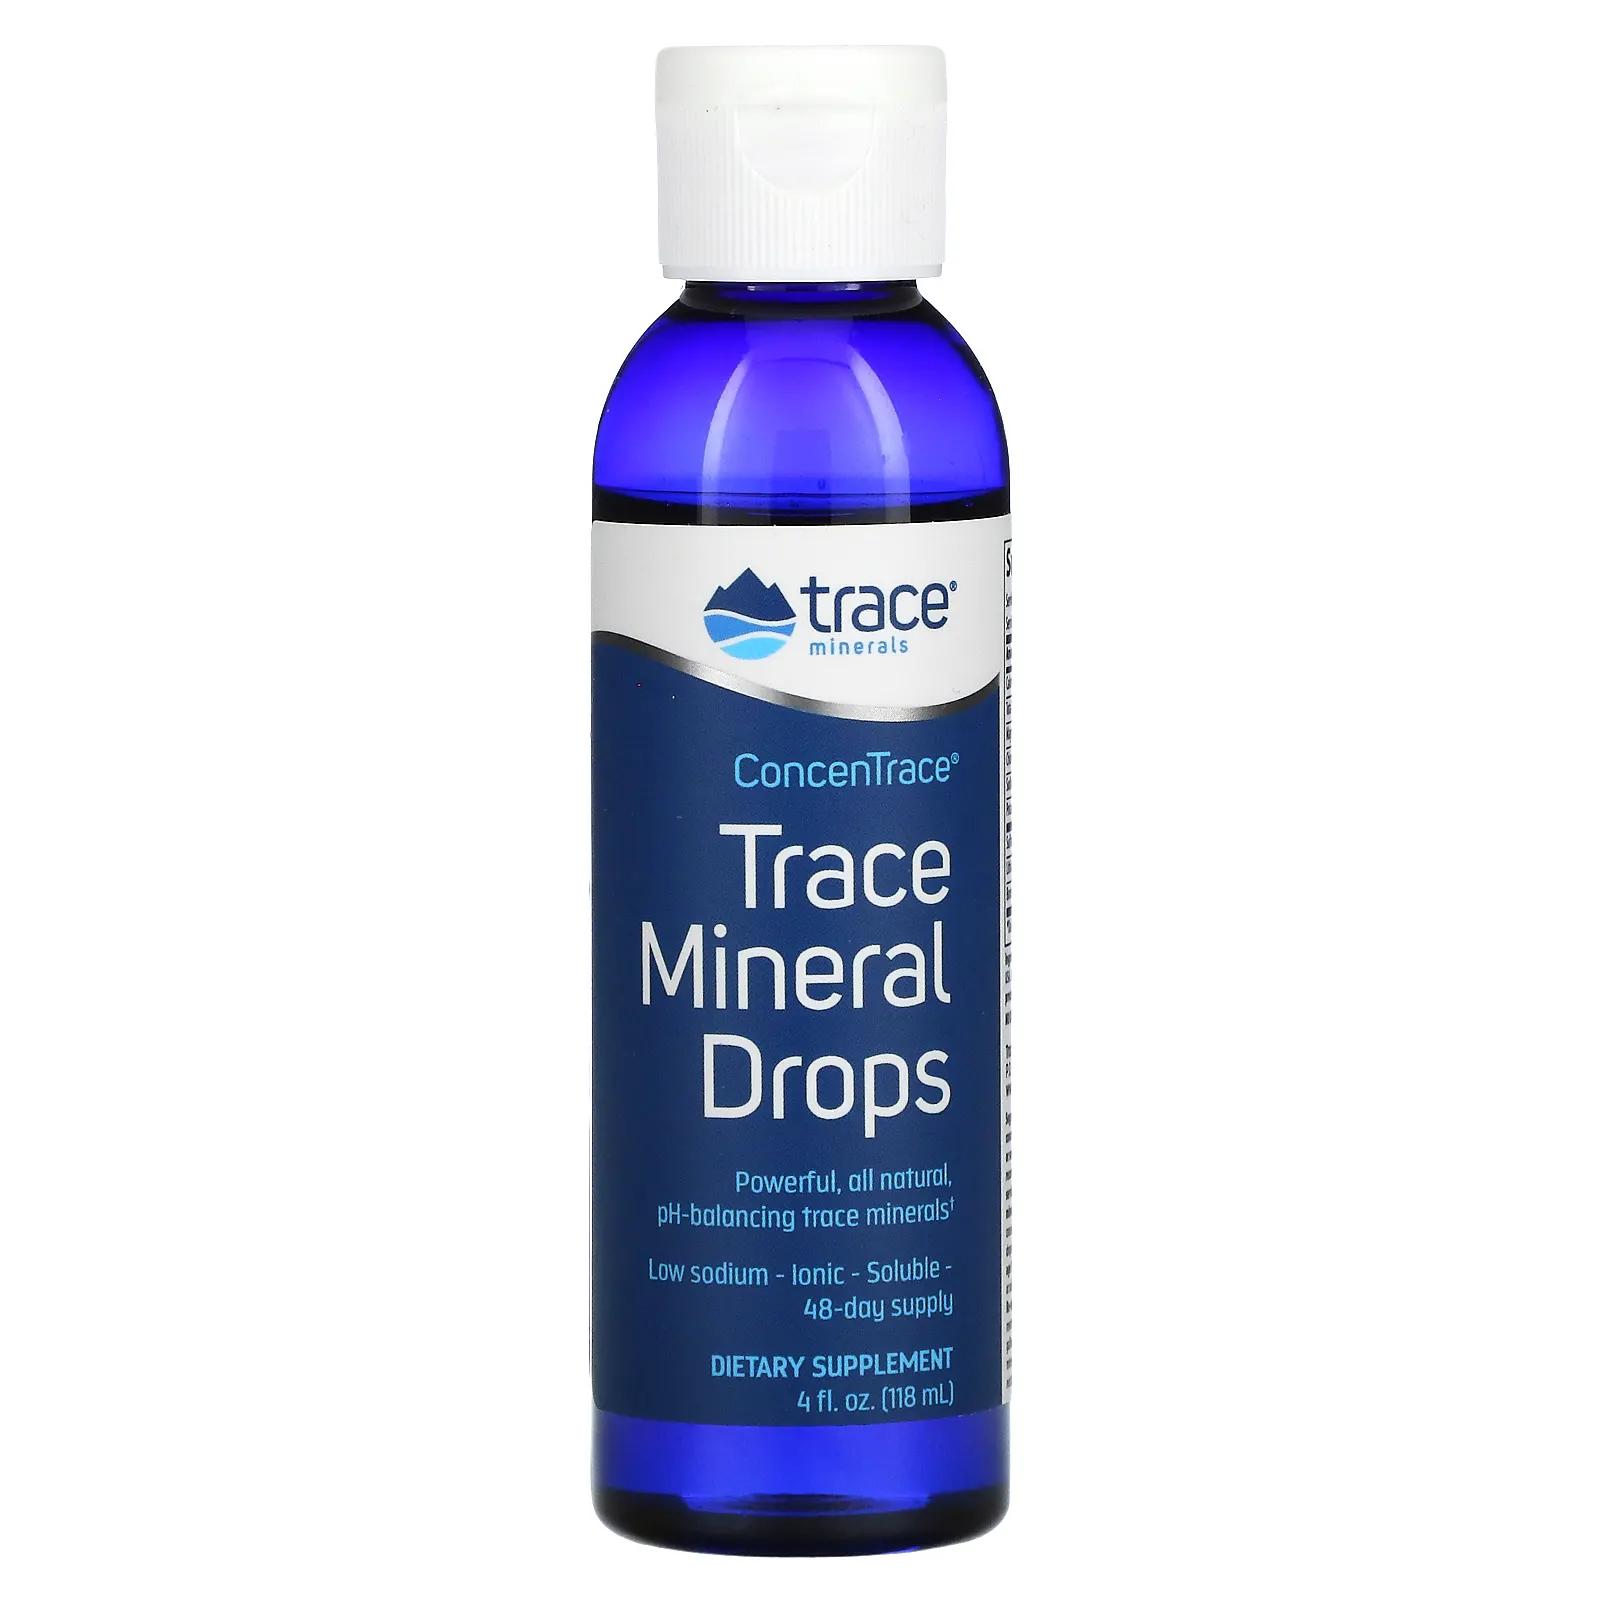 Trace Minerals Research ConcenTrace капли с микроэлементами 118 мл trace minerals research concentrace капли с микроэлементами 118 мл